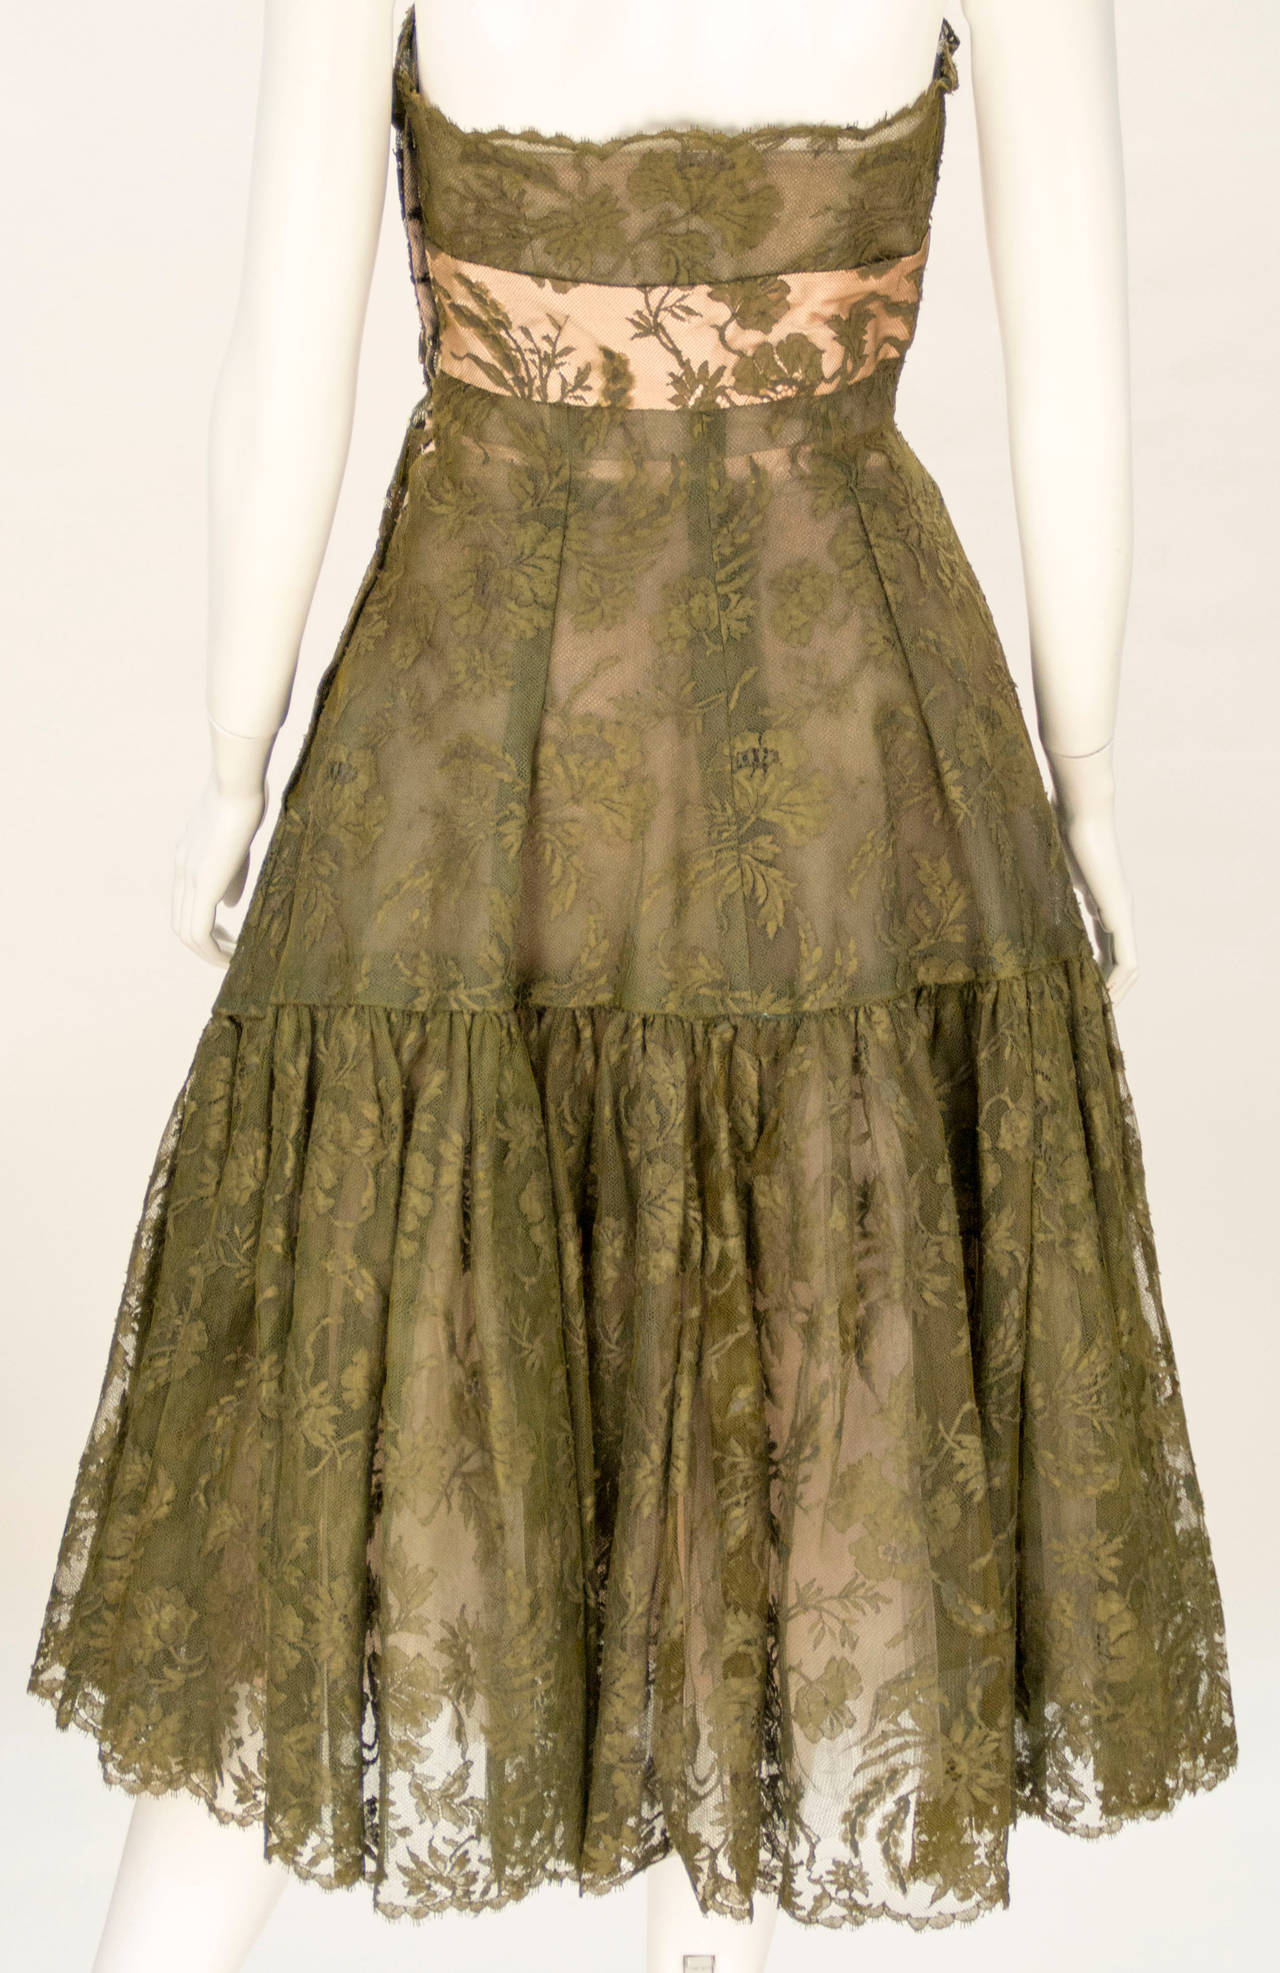 Extremely rare constructed and preserved is this 1950's Lanvin-Castillo designed dress.  With color typically used in the era, an olive green is used brilliantly upon the strapless lace bodice with pink accents.  This is Lanvin design at its finest.